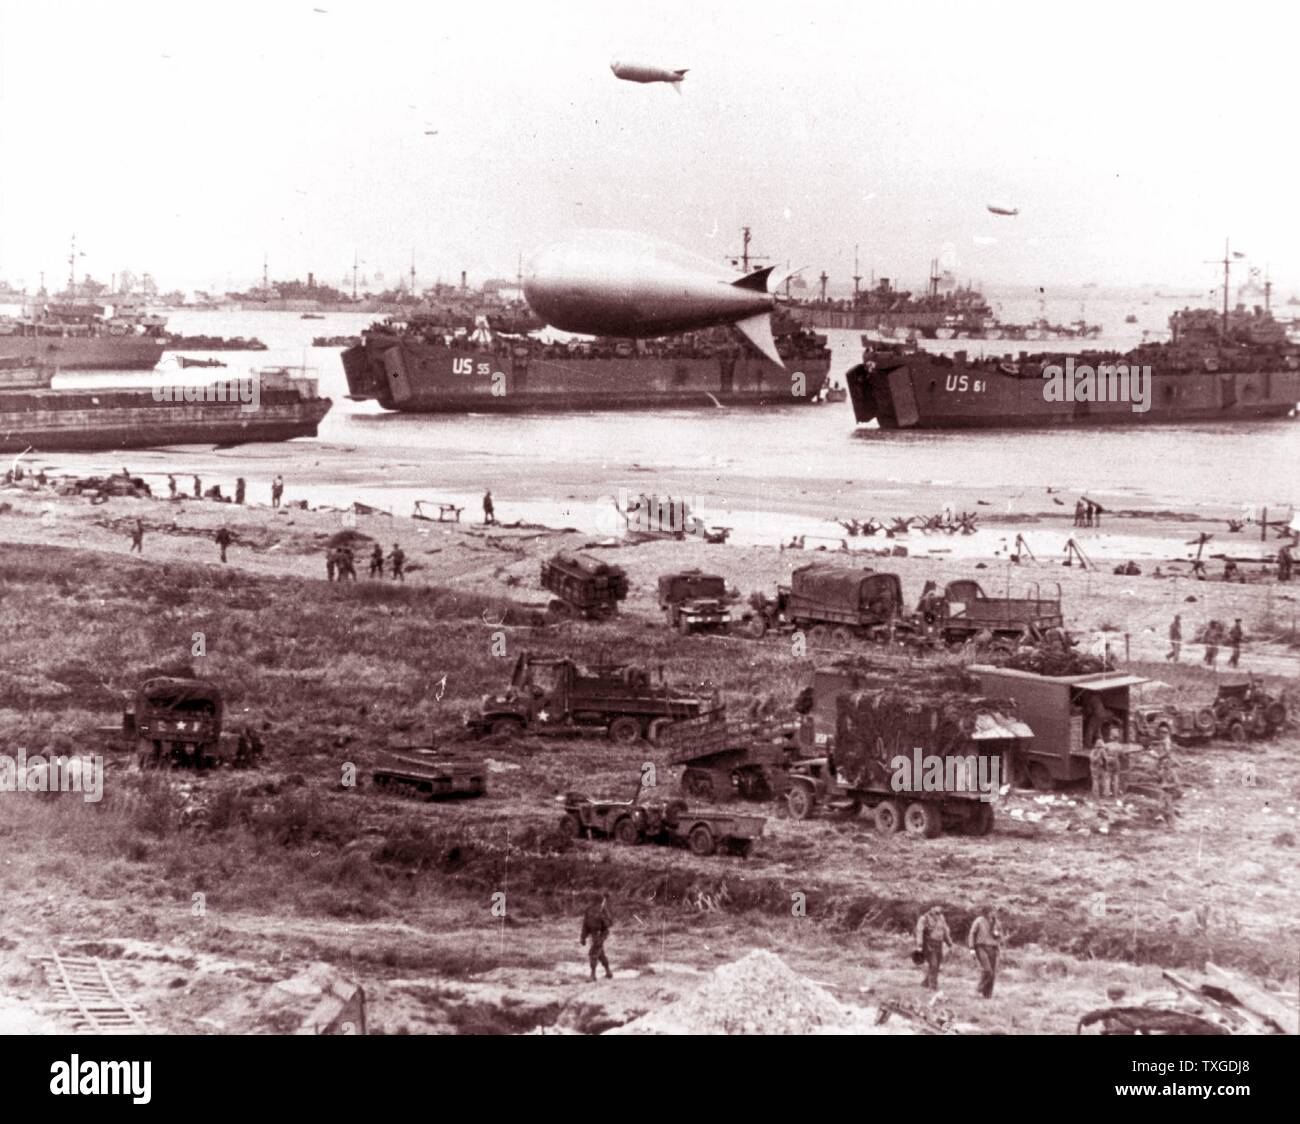 Photograph of D-Day landing vehicles, vessels used to convey a landing force (infantry and vehicles) from the sea to the shore during an amphibious assault. Dated 1944 Stock Photo